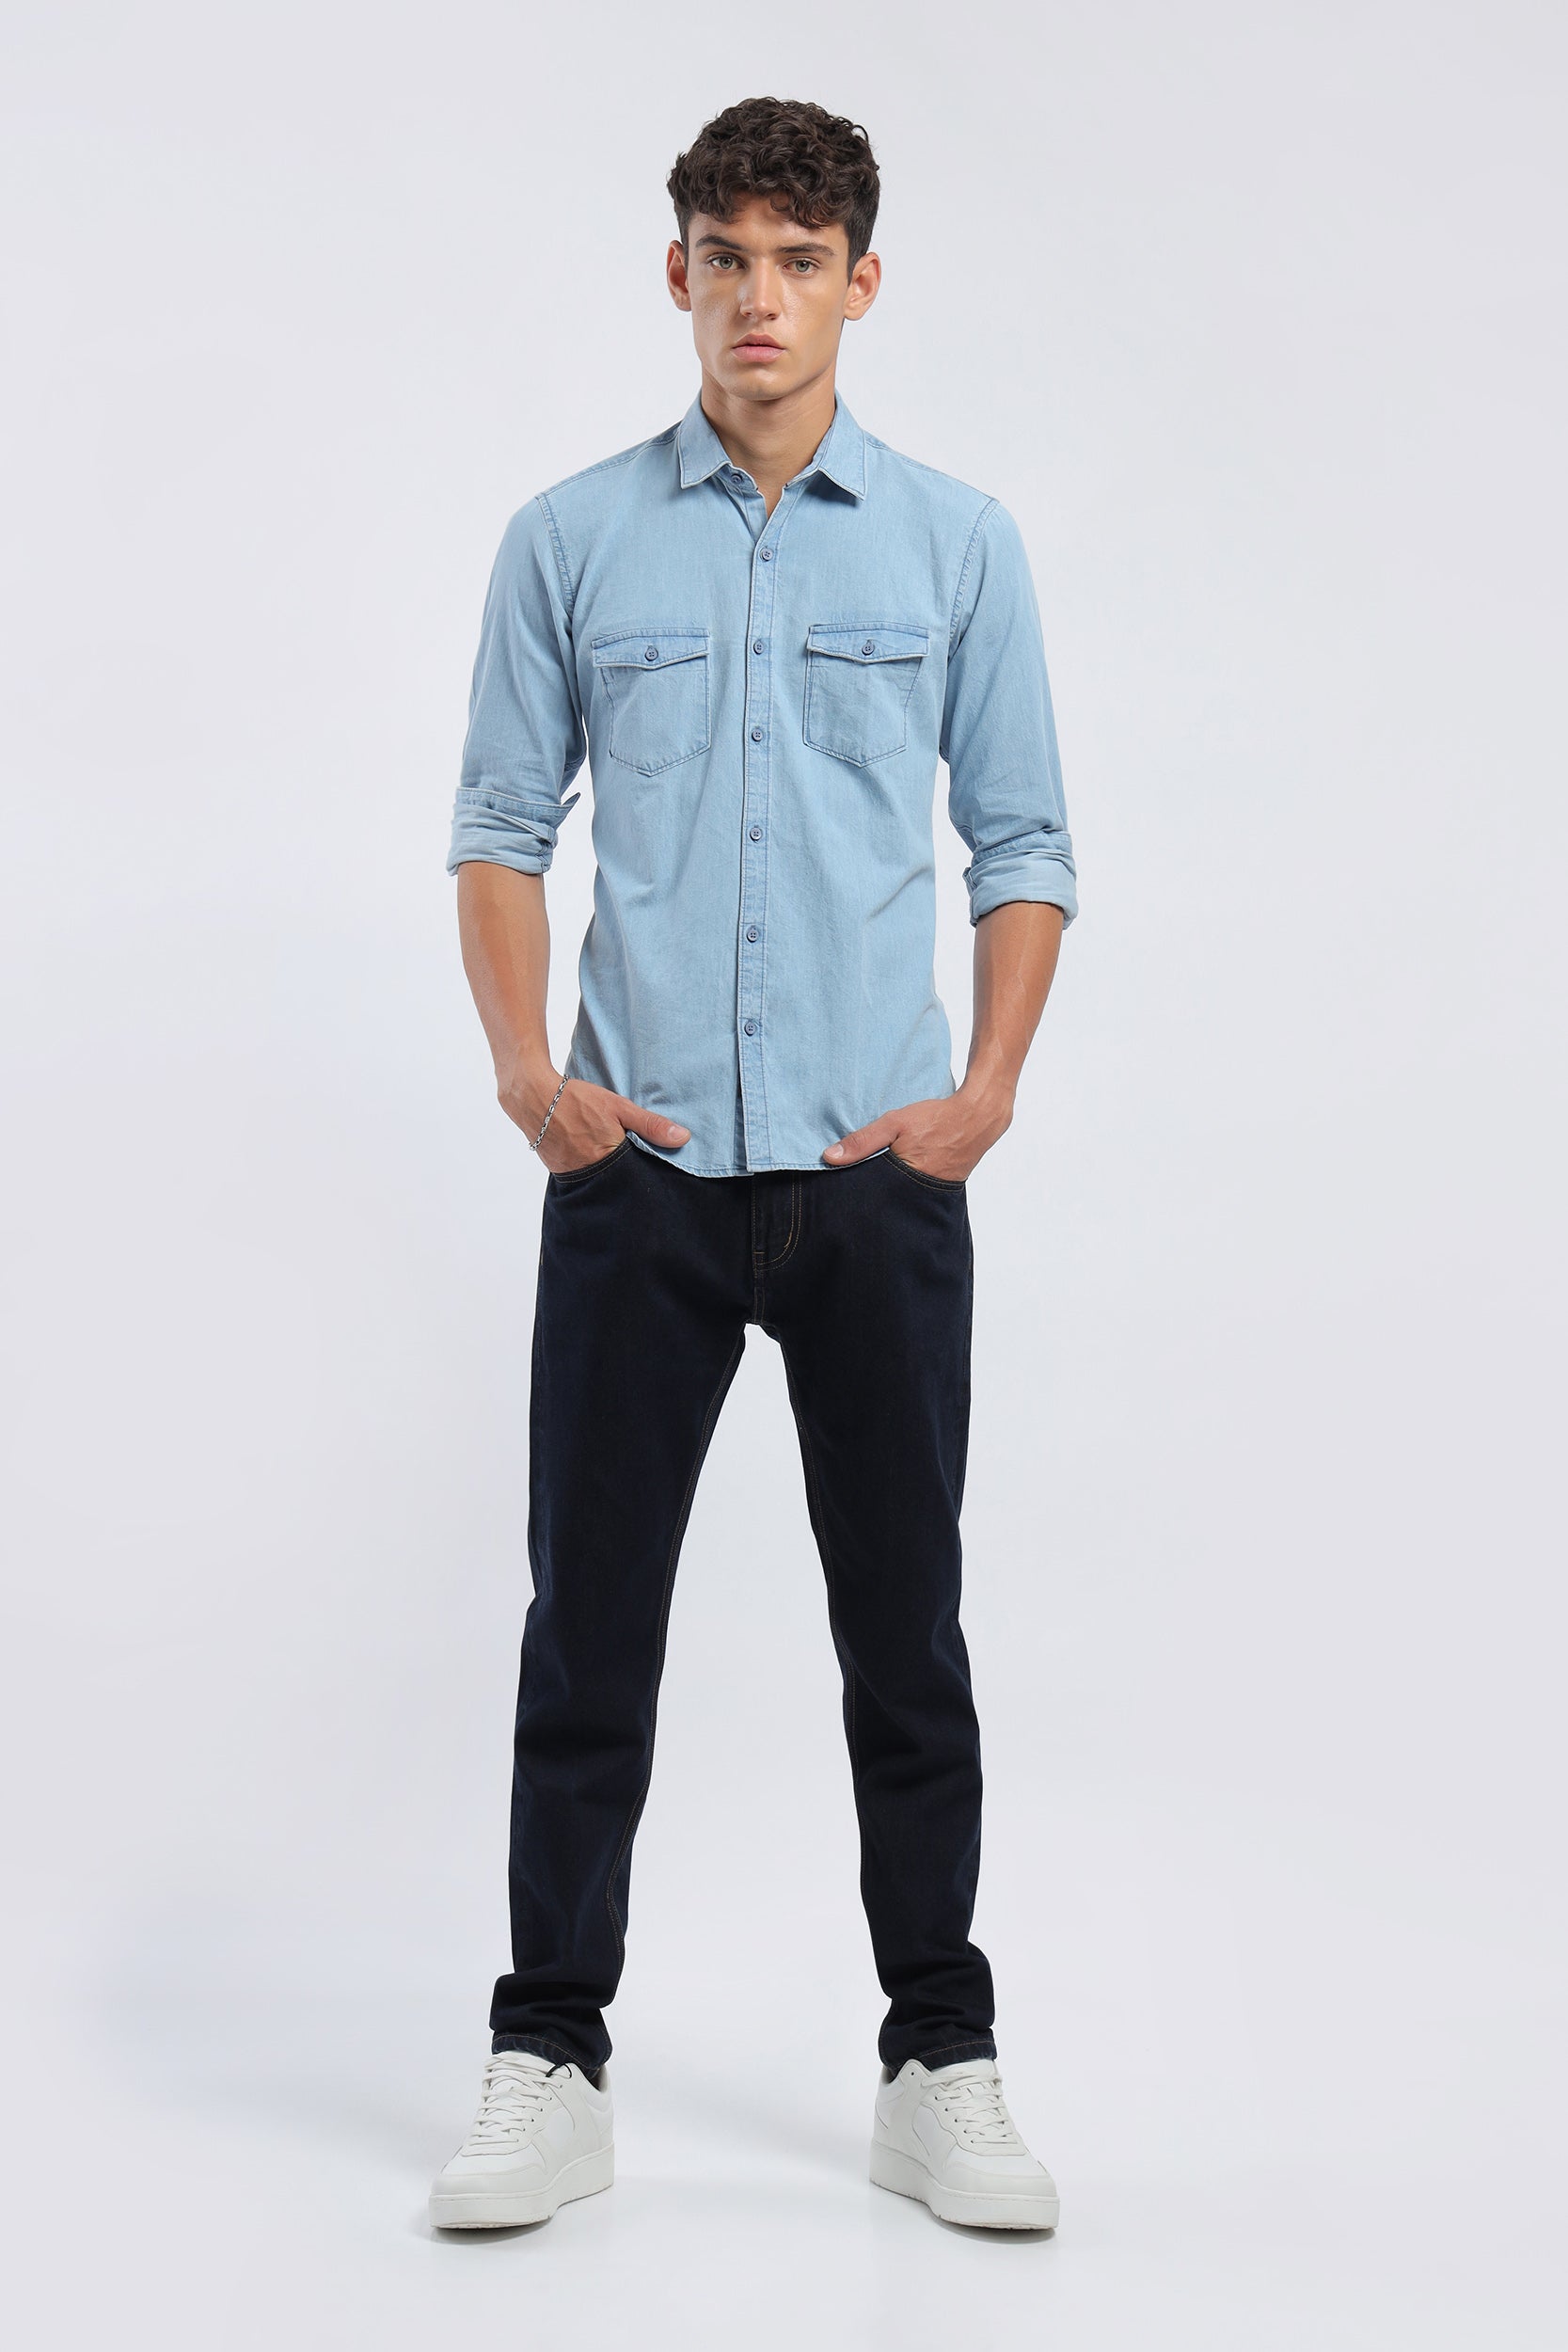 How To Style A Denim Shirt - Men's Outfit Ideas For Jean Shirts